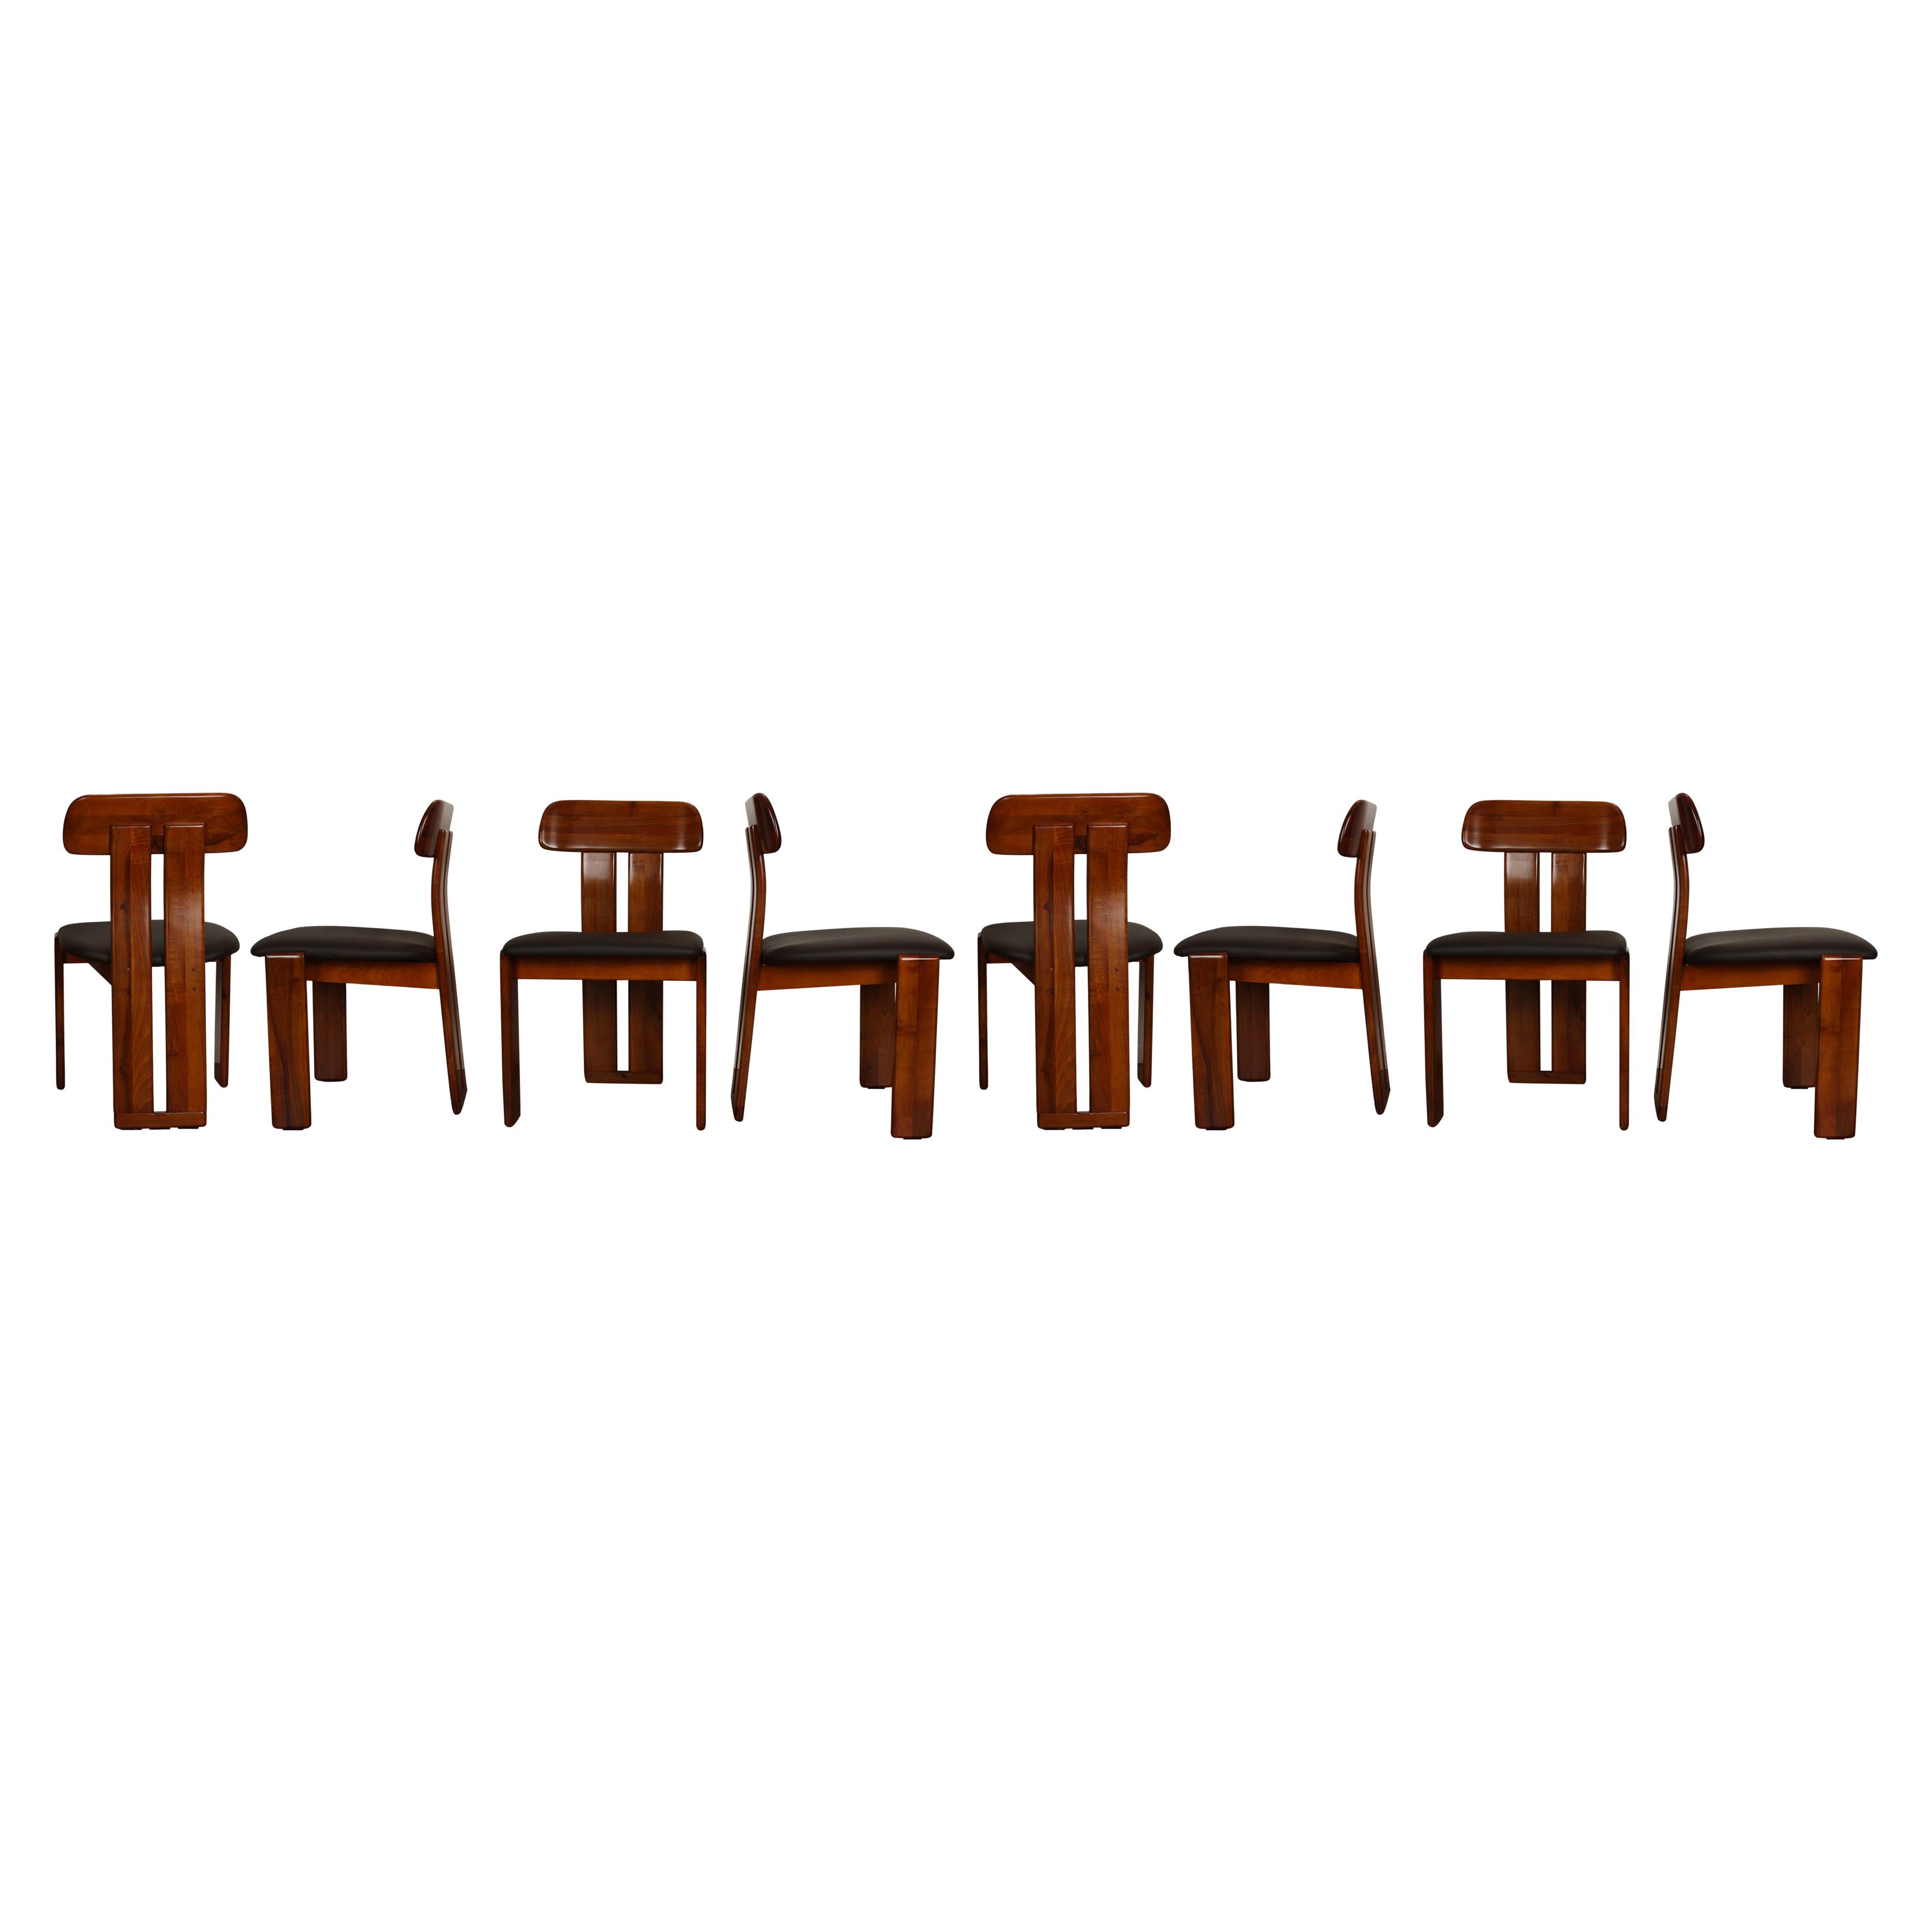 Set of eight “Sapporo” dining chairs, designed by Mario Marenco and produced by the Italian manufacturer Mobilgirgi in the 1970s.
They feature a walnut briar structure and a brown leather seater.

Fully restored in Italy..

The highly acclaimed